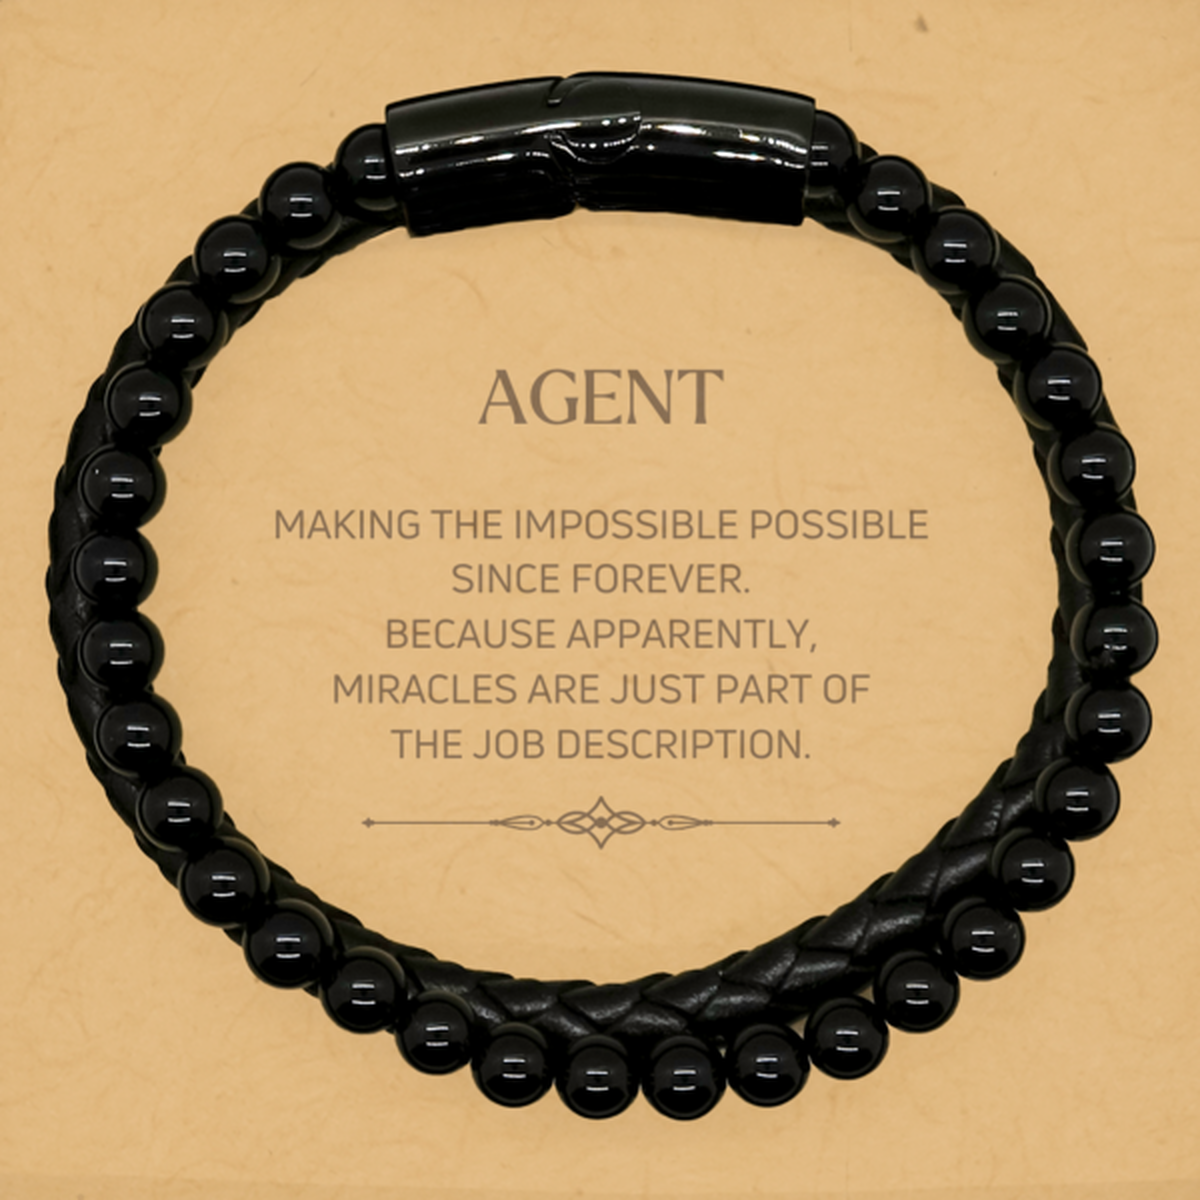 Funny Agent Gifts, Miracles are just part of the job description, Inspirational Birthday Stone Leather Bracelets For Agent, Men, Women, Coworkers, Friends, Boss